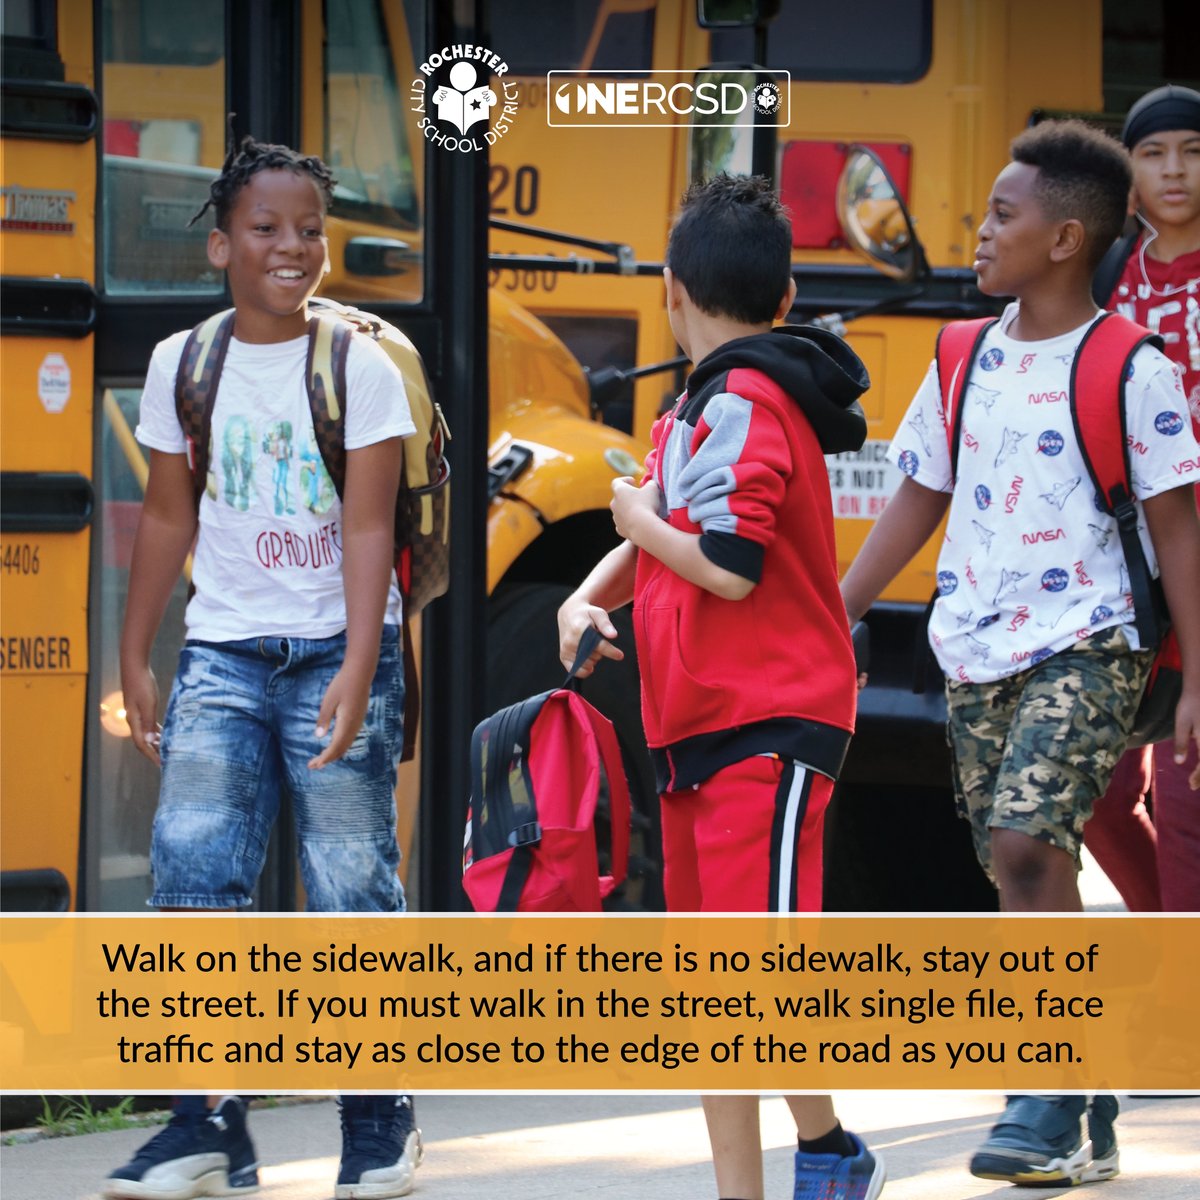 Happy #SchoolBusSafetyWeek! Today's tip is about good pedestrian behavior! Walk on the sidewalk, and if there is no sidewalk, stay out of the street. If you must walk in the street, walk single file, face traffic and stay as close to the edge of the road as you can. #ONERCSD